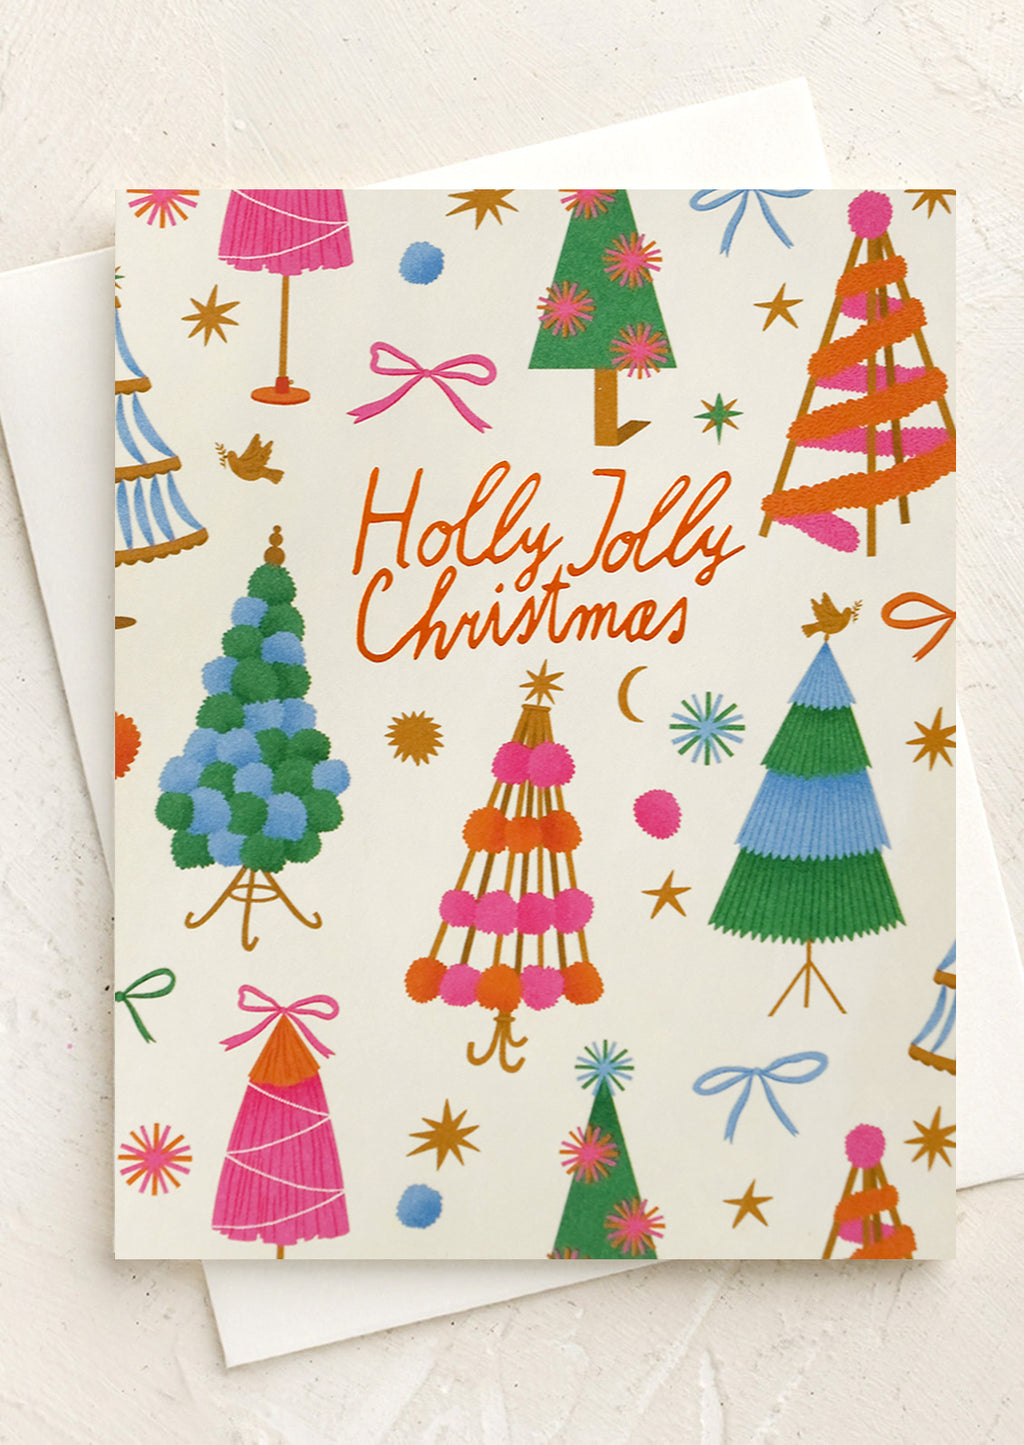 2: A colorful tree print card set reading "Holly jolly christmas".